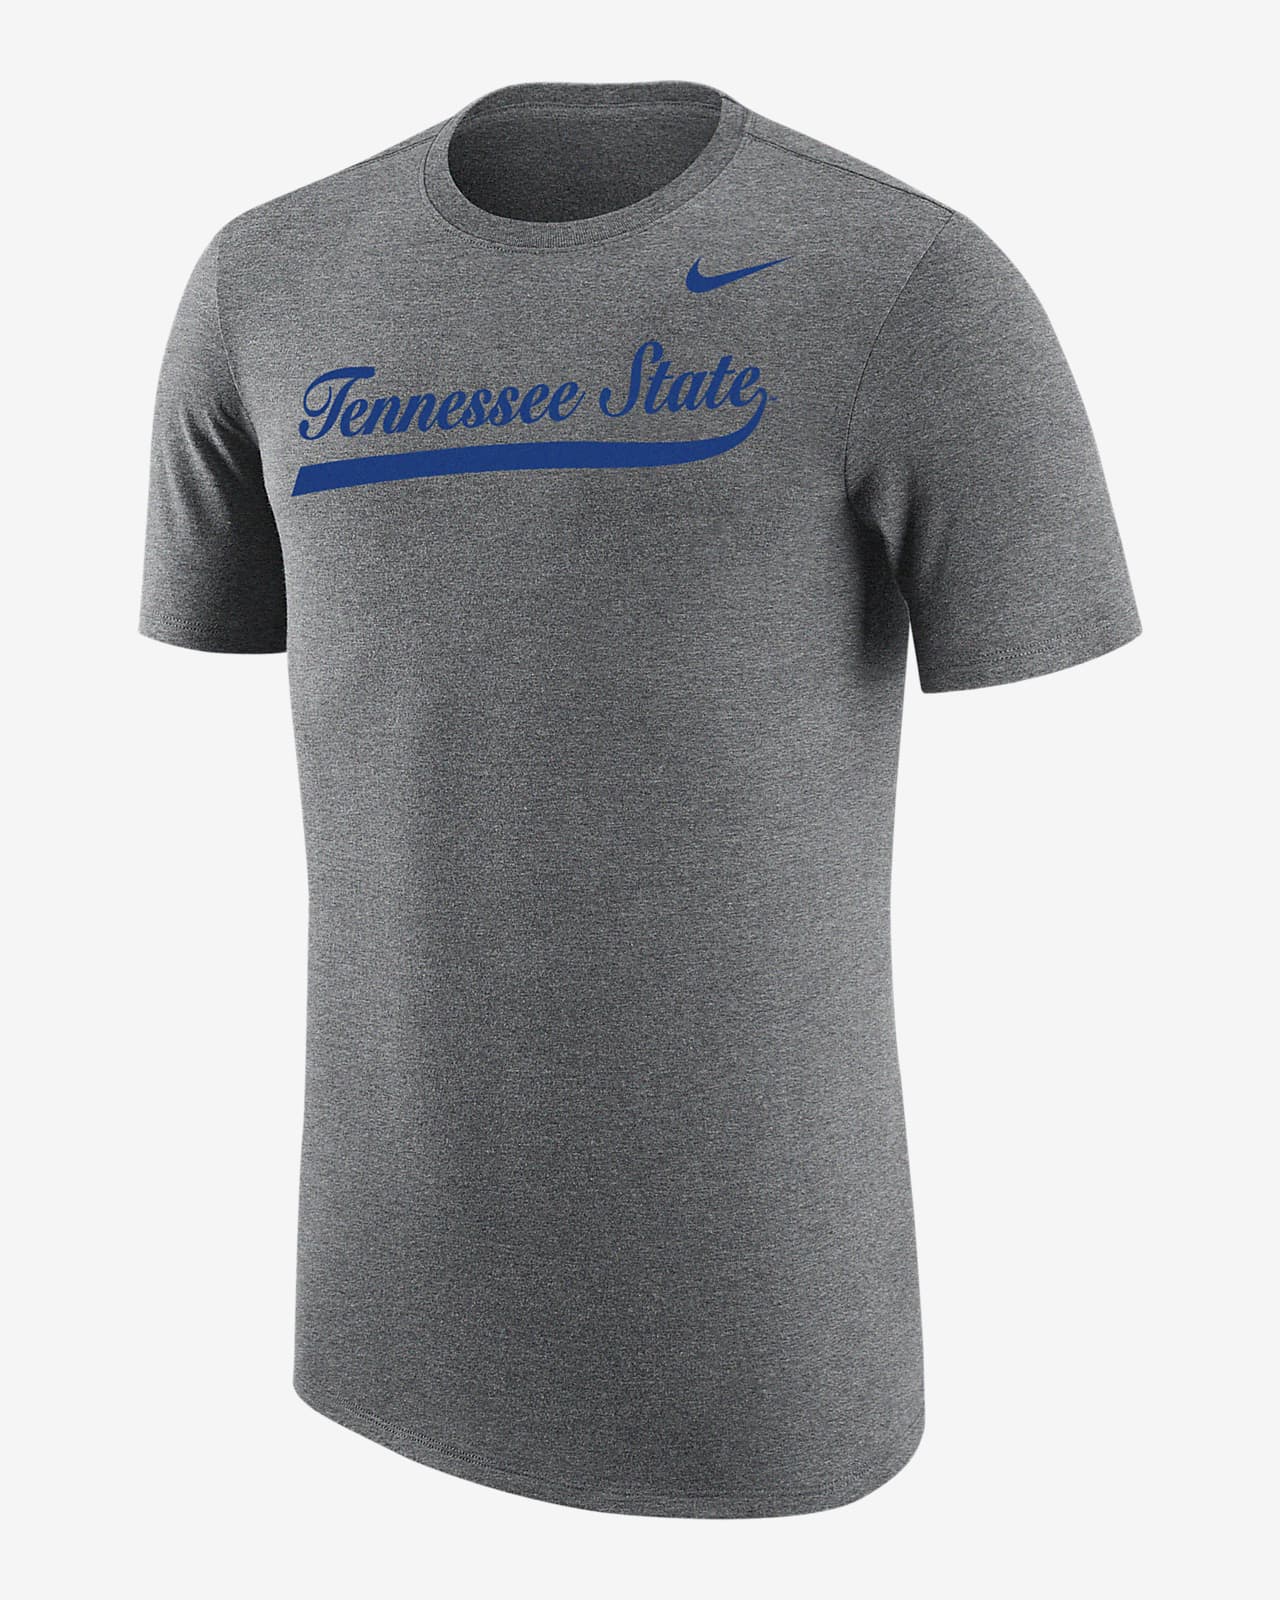 Tennessee State Men's Nike College T-Shirt